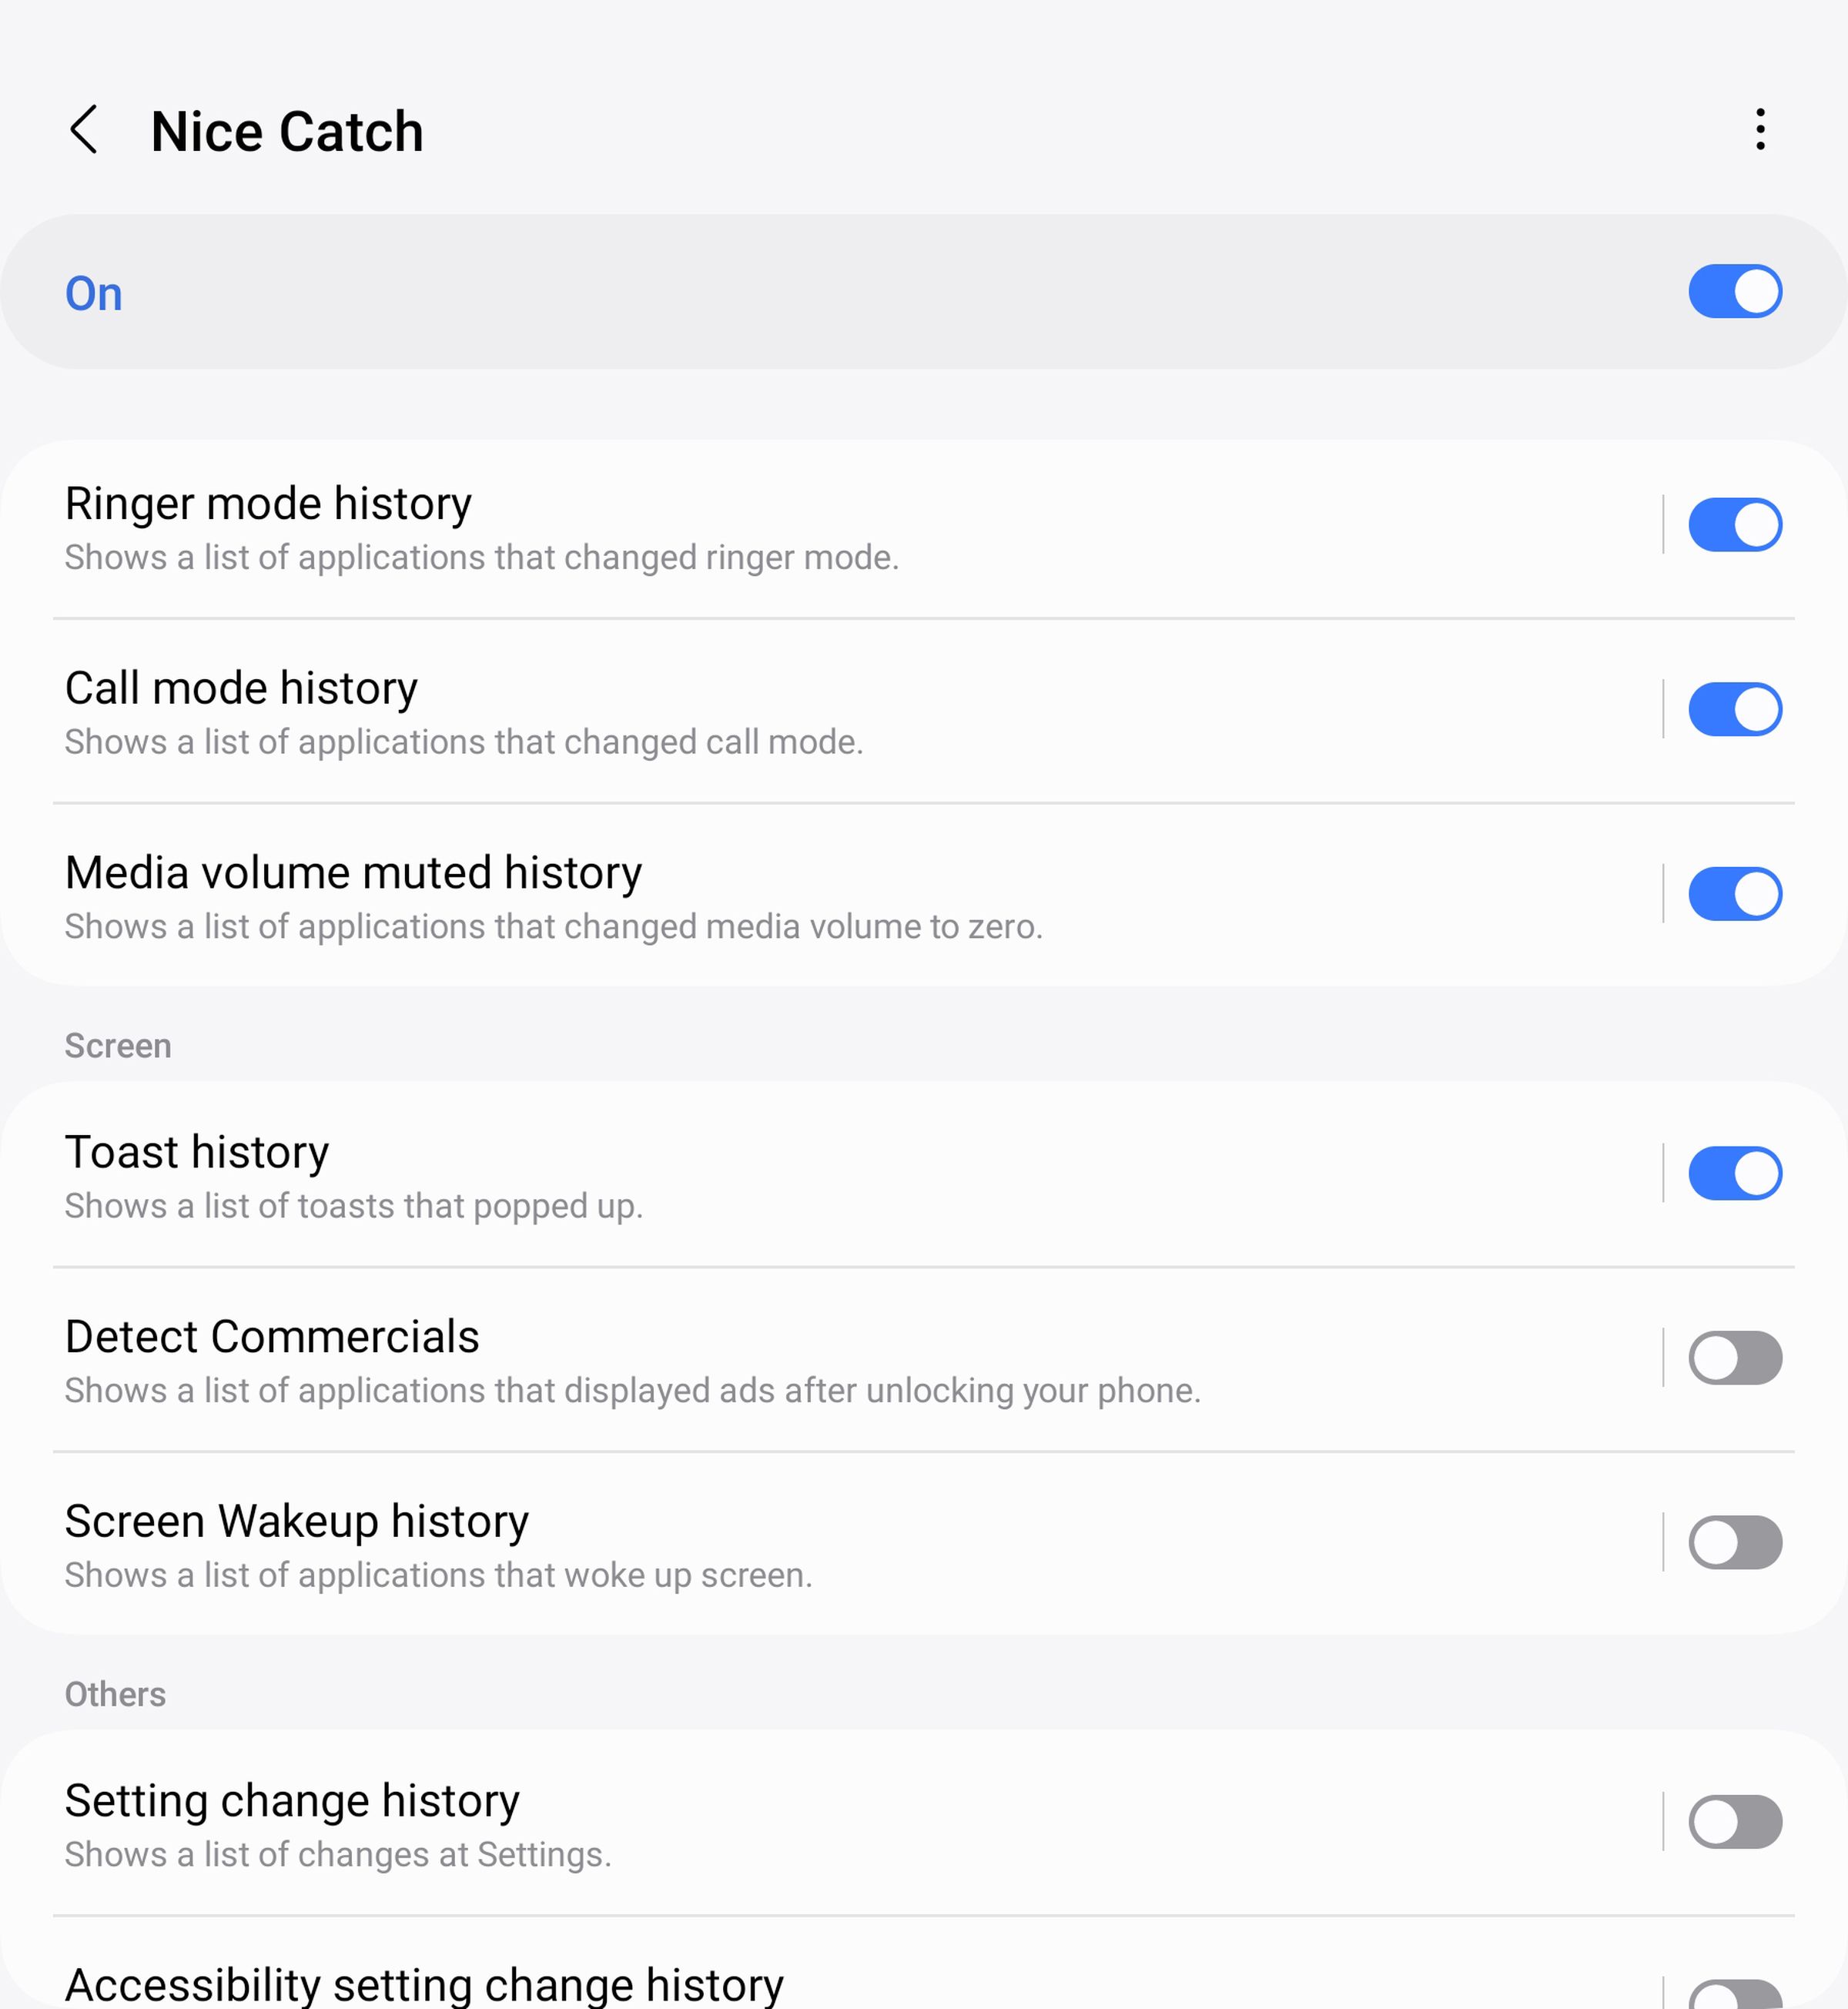 Nice Catch page with list of phone features and toggles.